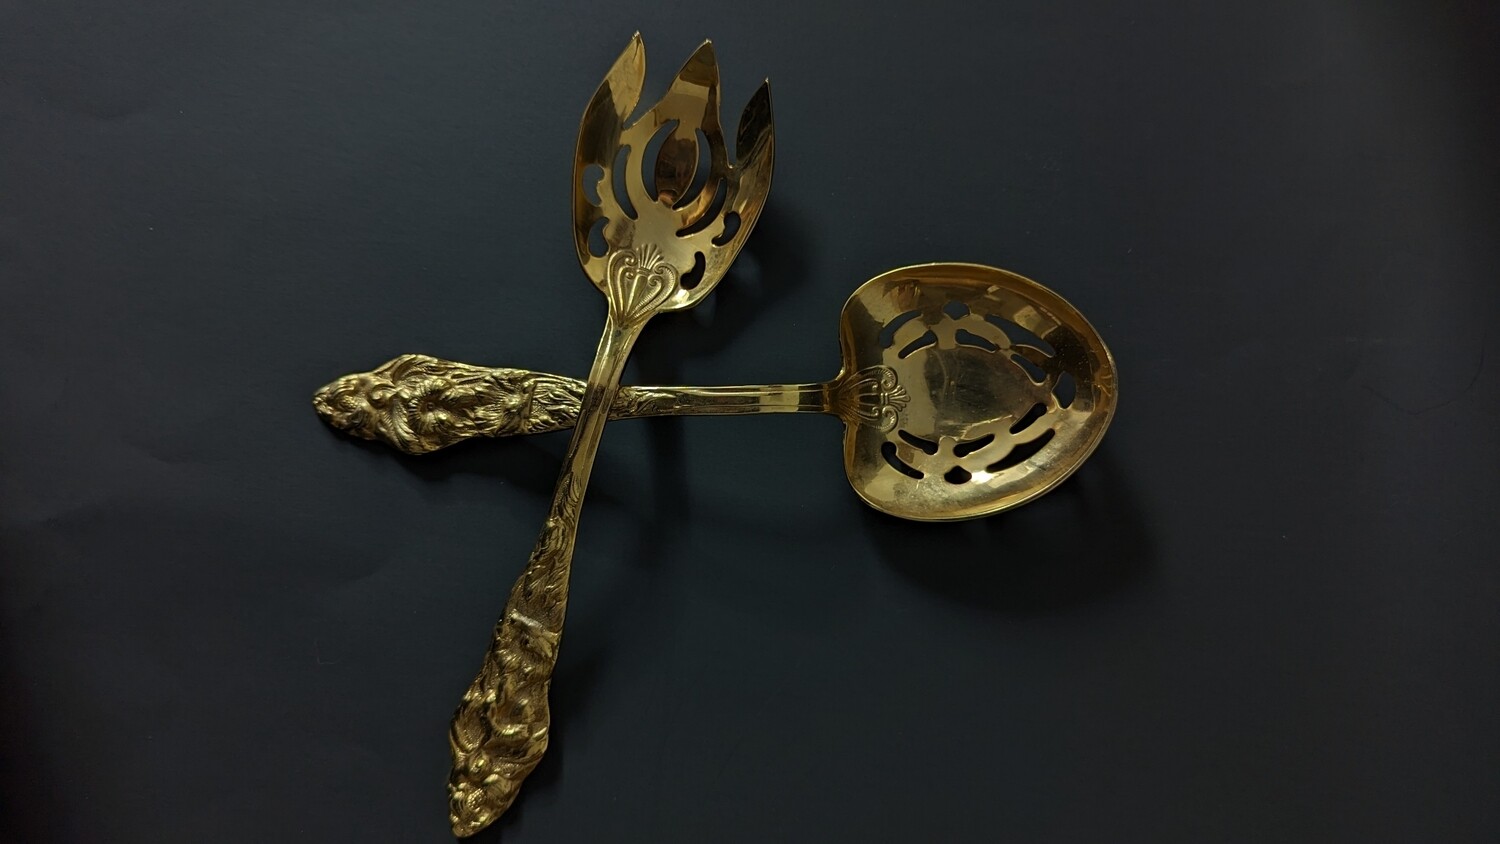 Gold colored utensils